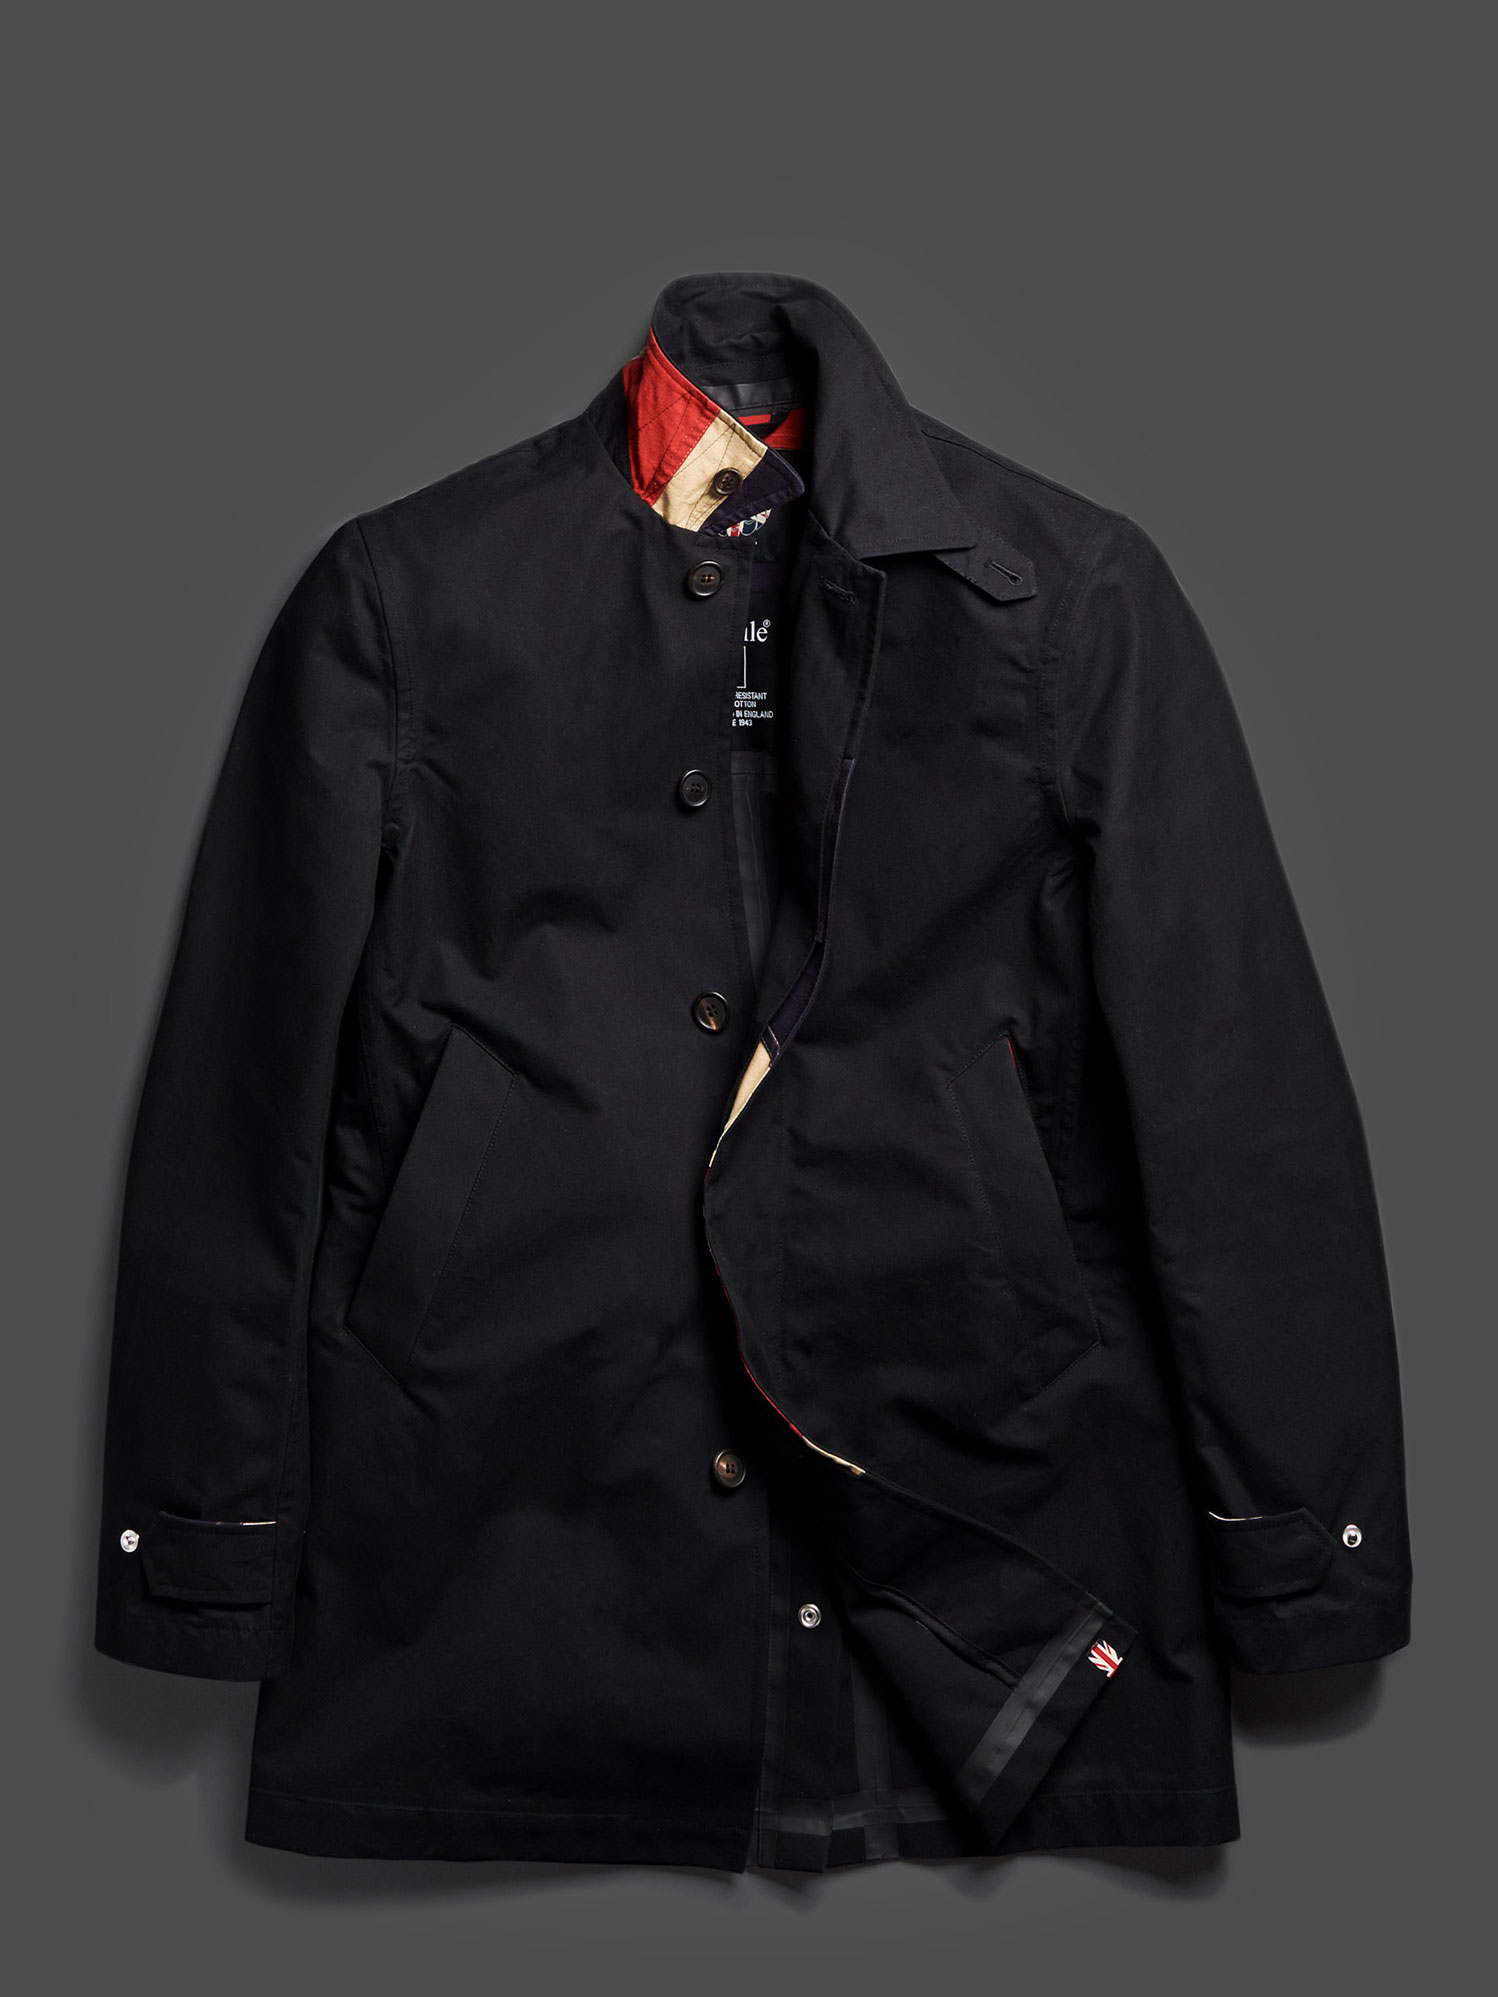 Made in England | Pretty Green | Men's Clothing and Accessories.